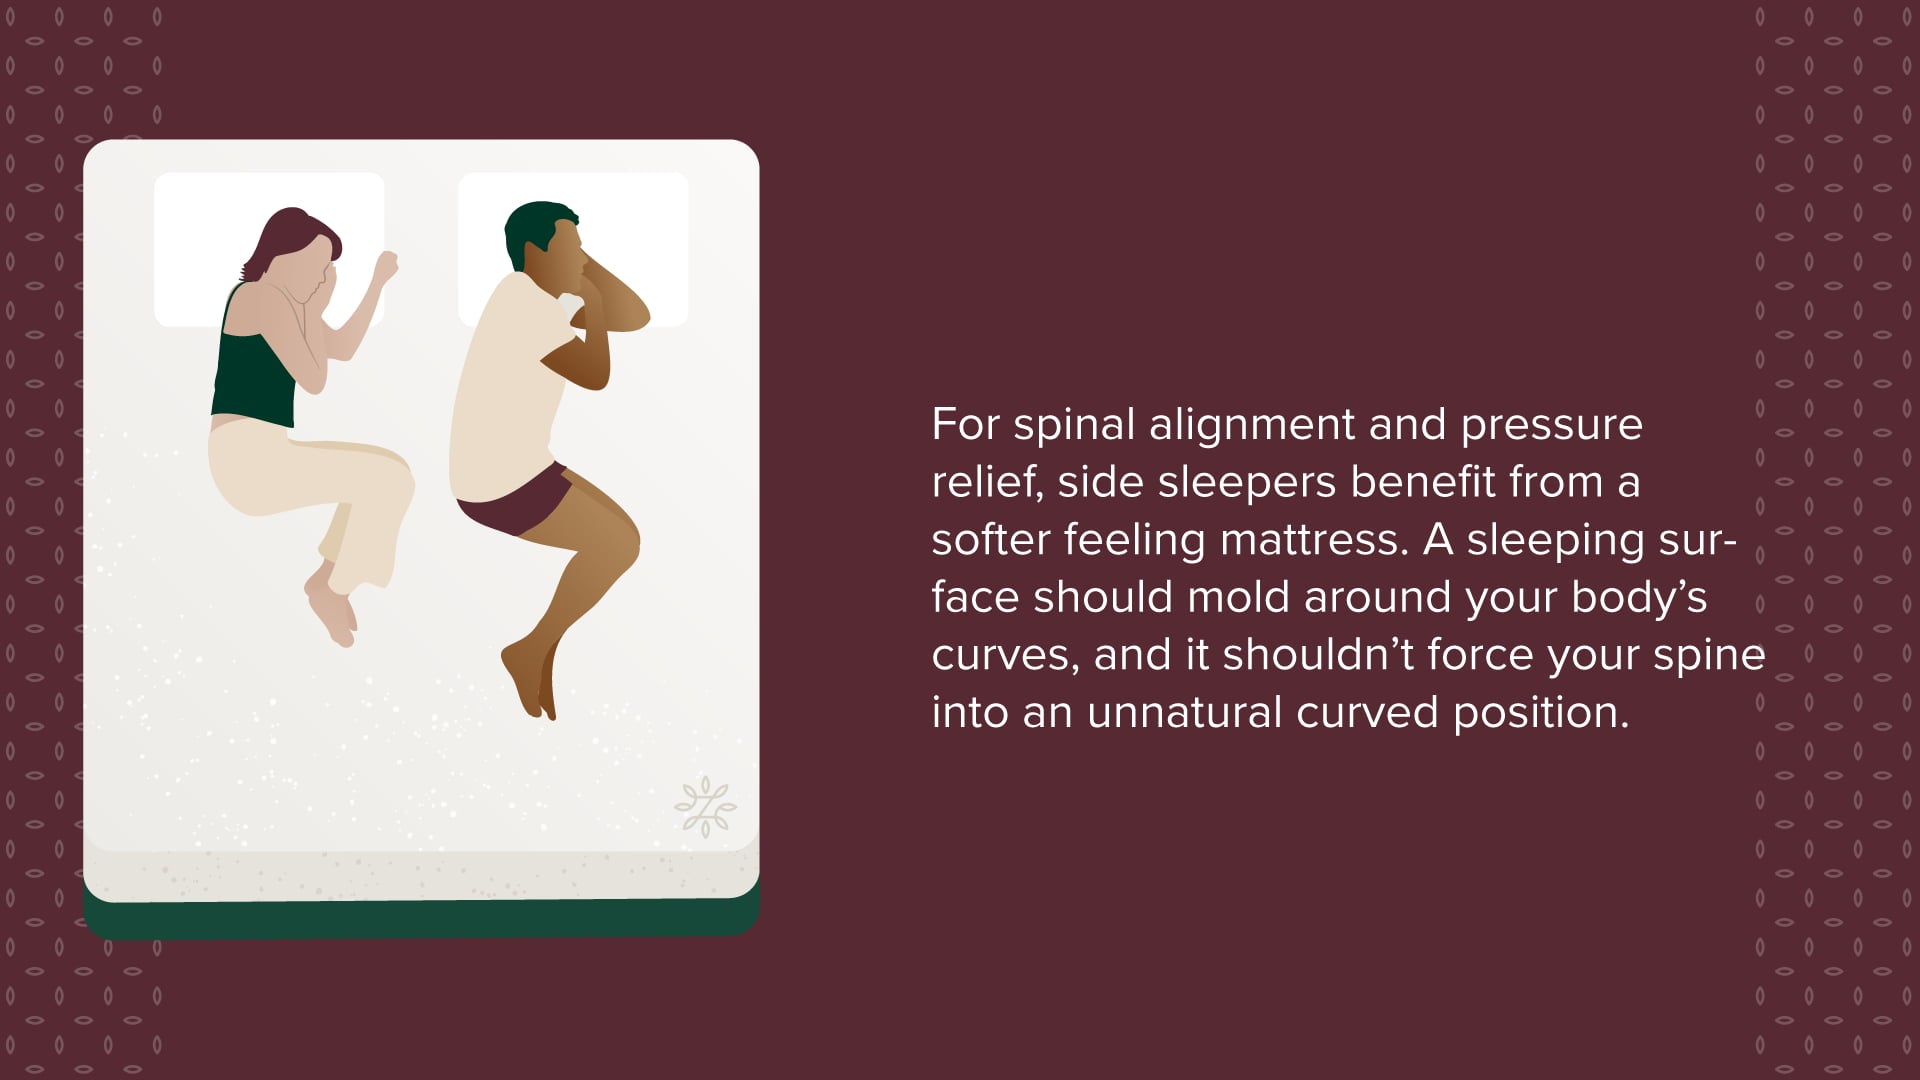 For spinal alignment and pressure-relief, side sleepers benefit from a softer feeling mattress